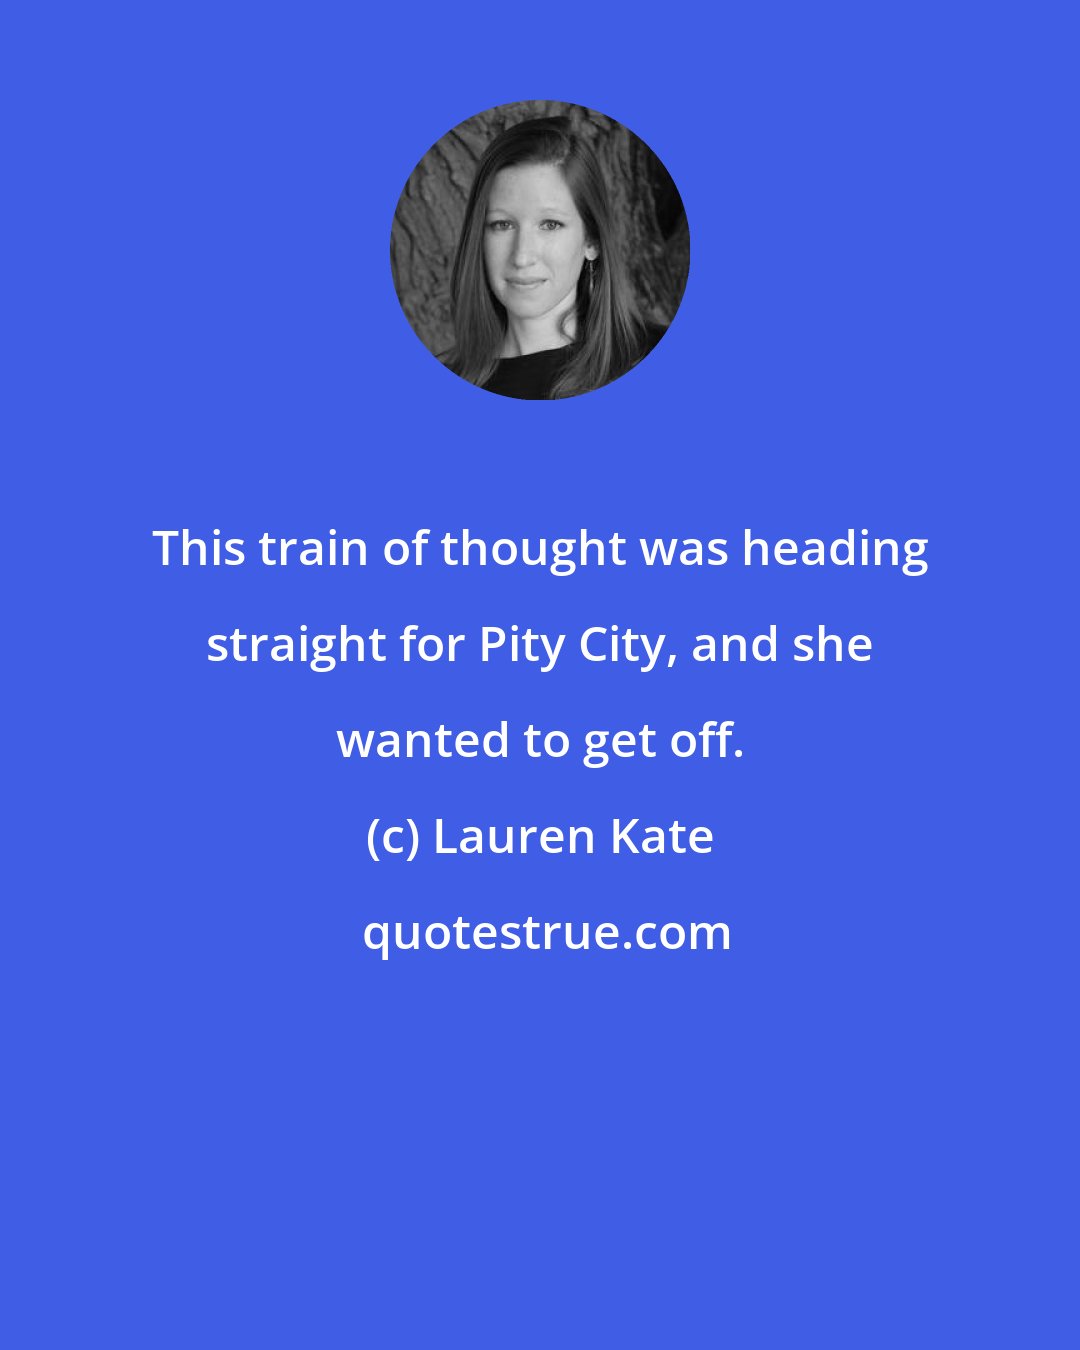 Lauren Kate: This train of thought was heading straight for Pity City, and she wanted to get off.